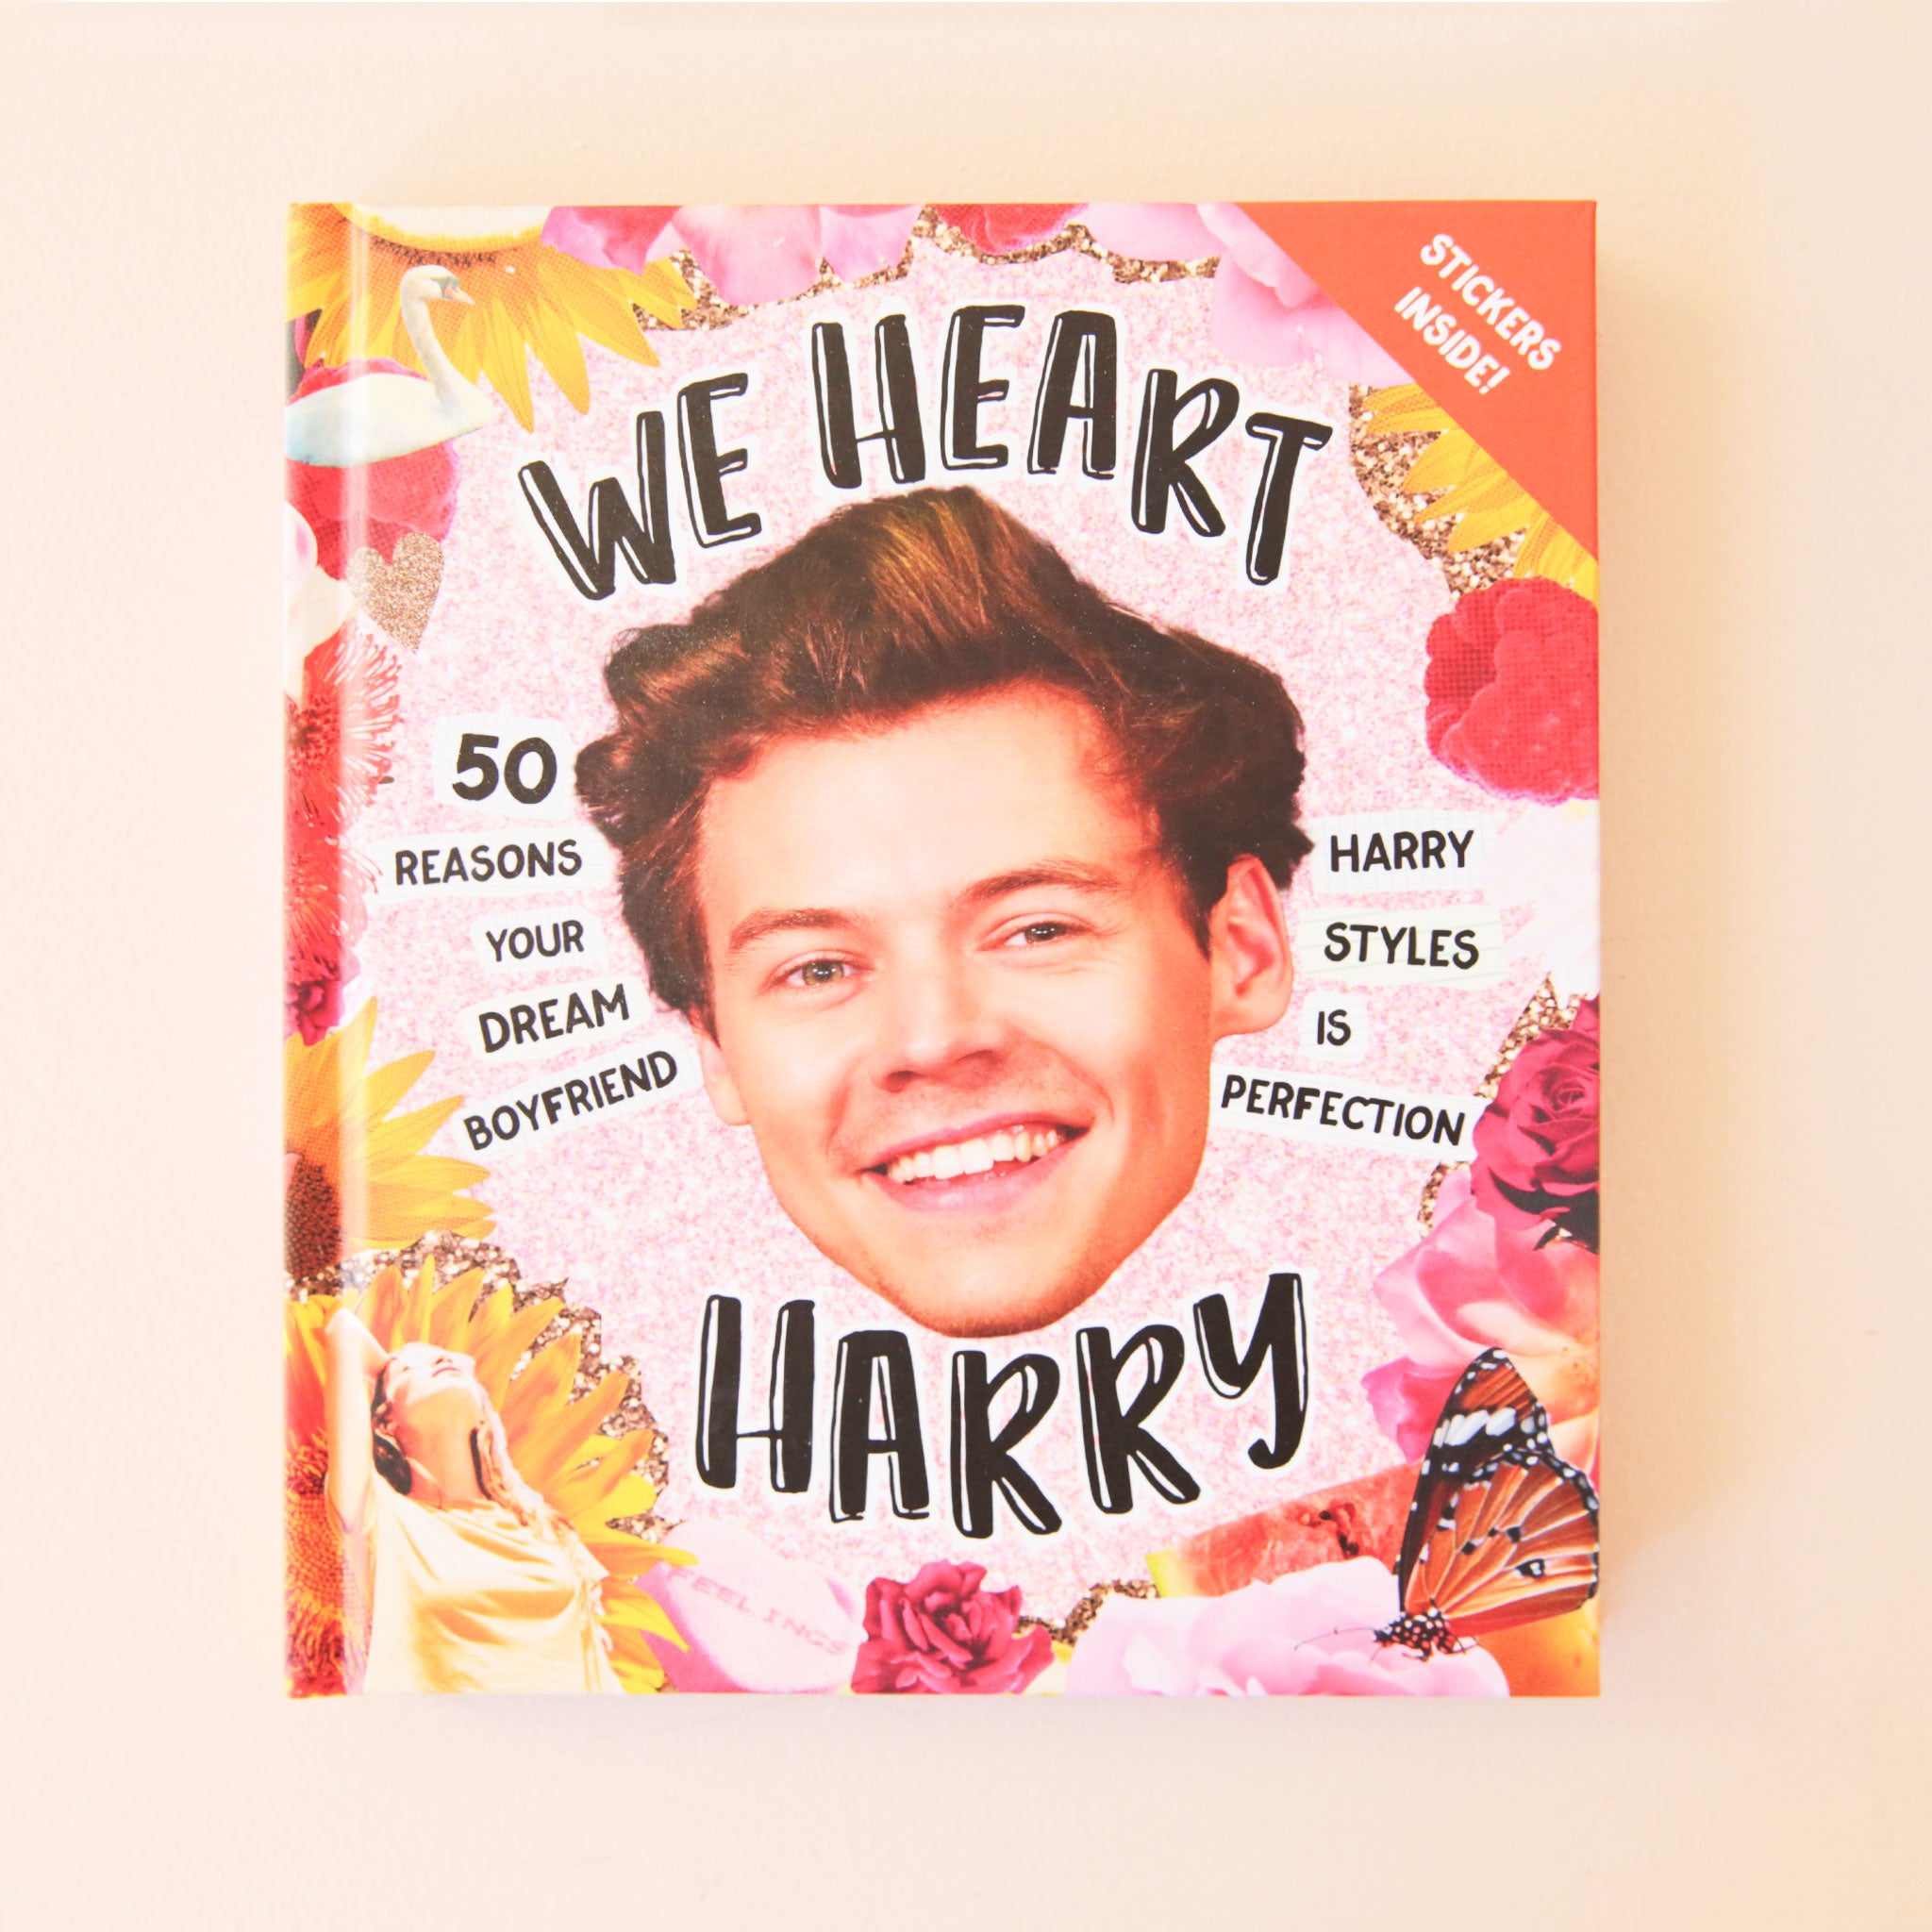 A vibrant pink and yellow book cover with a photo of Harry Styles face front and center as well as text that reads, &quot;We Heart Harry&quot;, &quot;50 Reasons Your Dream Boyfriend Harry Styles Is Perfection&quot;.